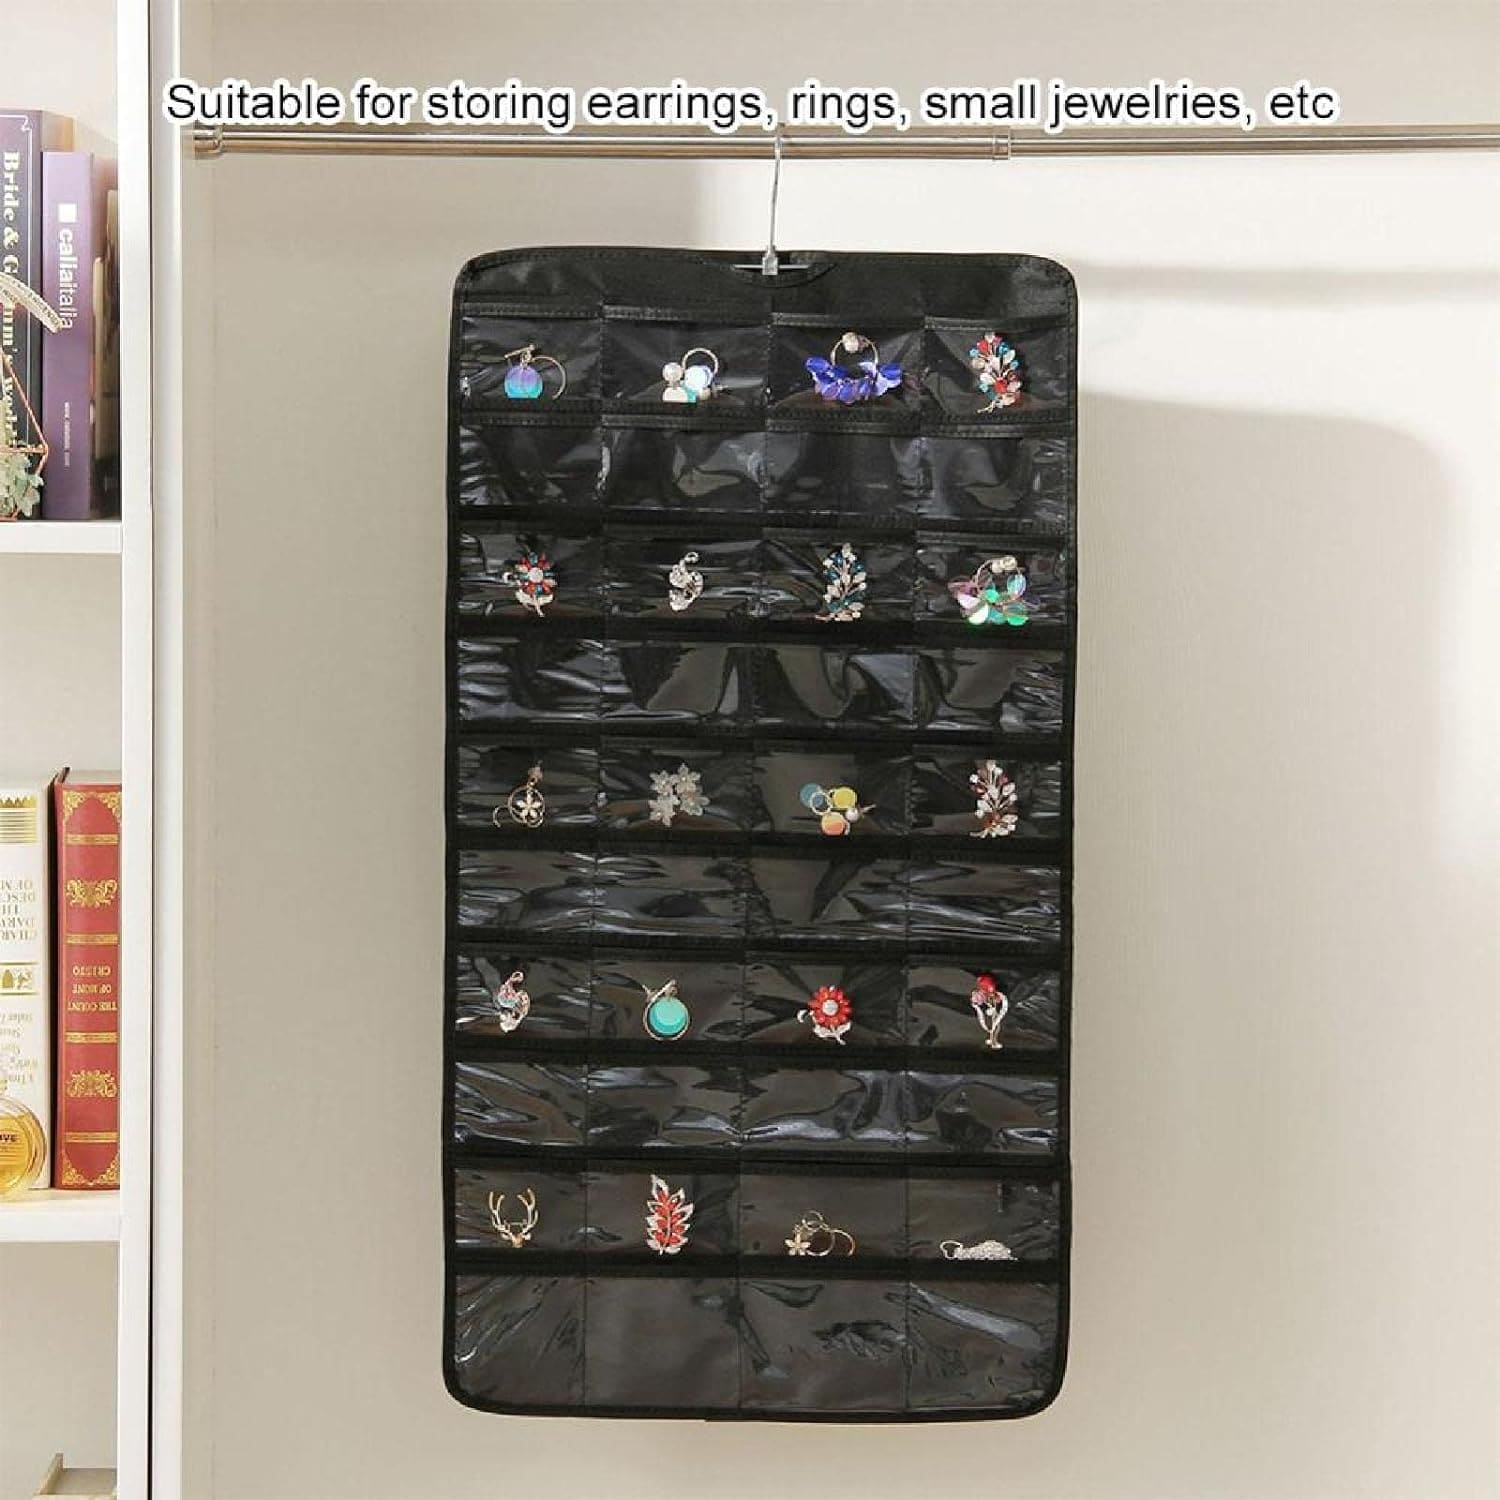 72 Pocket Hanging Organizer, Double Sided Hanging Display Storage Bag, Transparent Window Jewelry Bag, Dust-proof Foldable Bag, Multifunction Wardrobe Storage Holder Bag with Hook, Dual Sided Jewellery Carrier